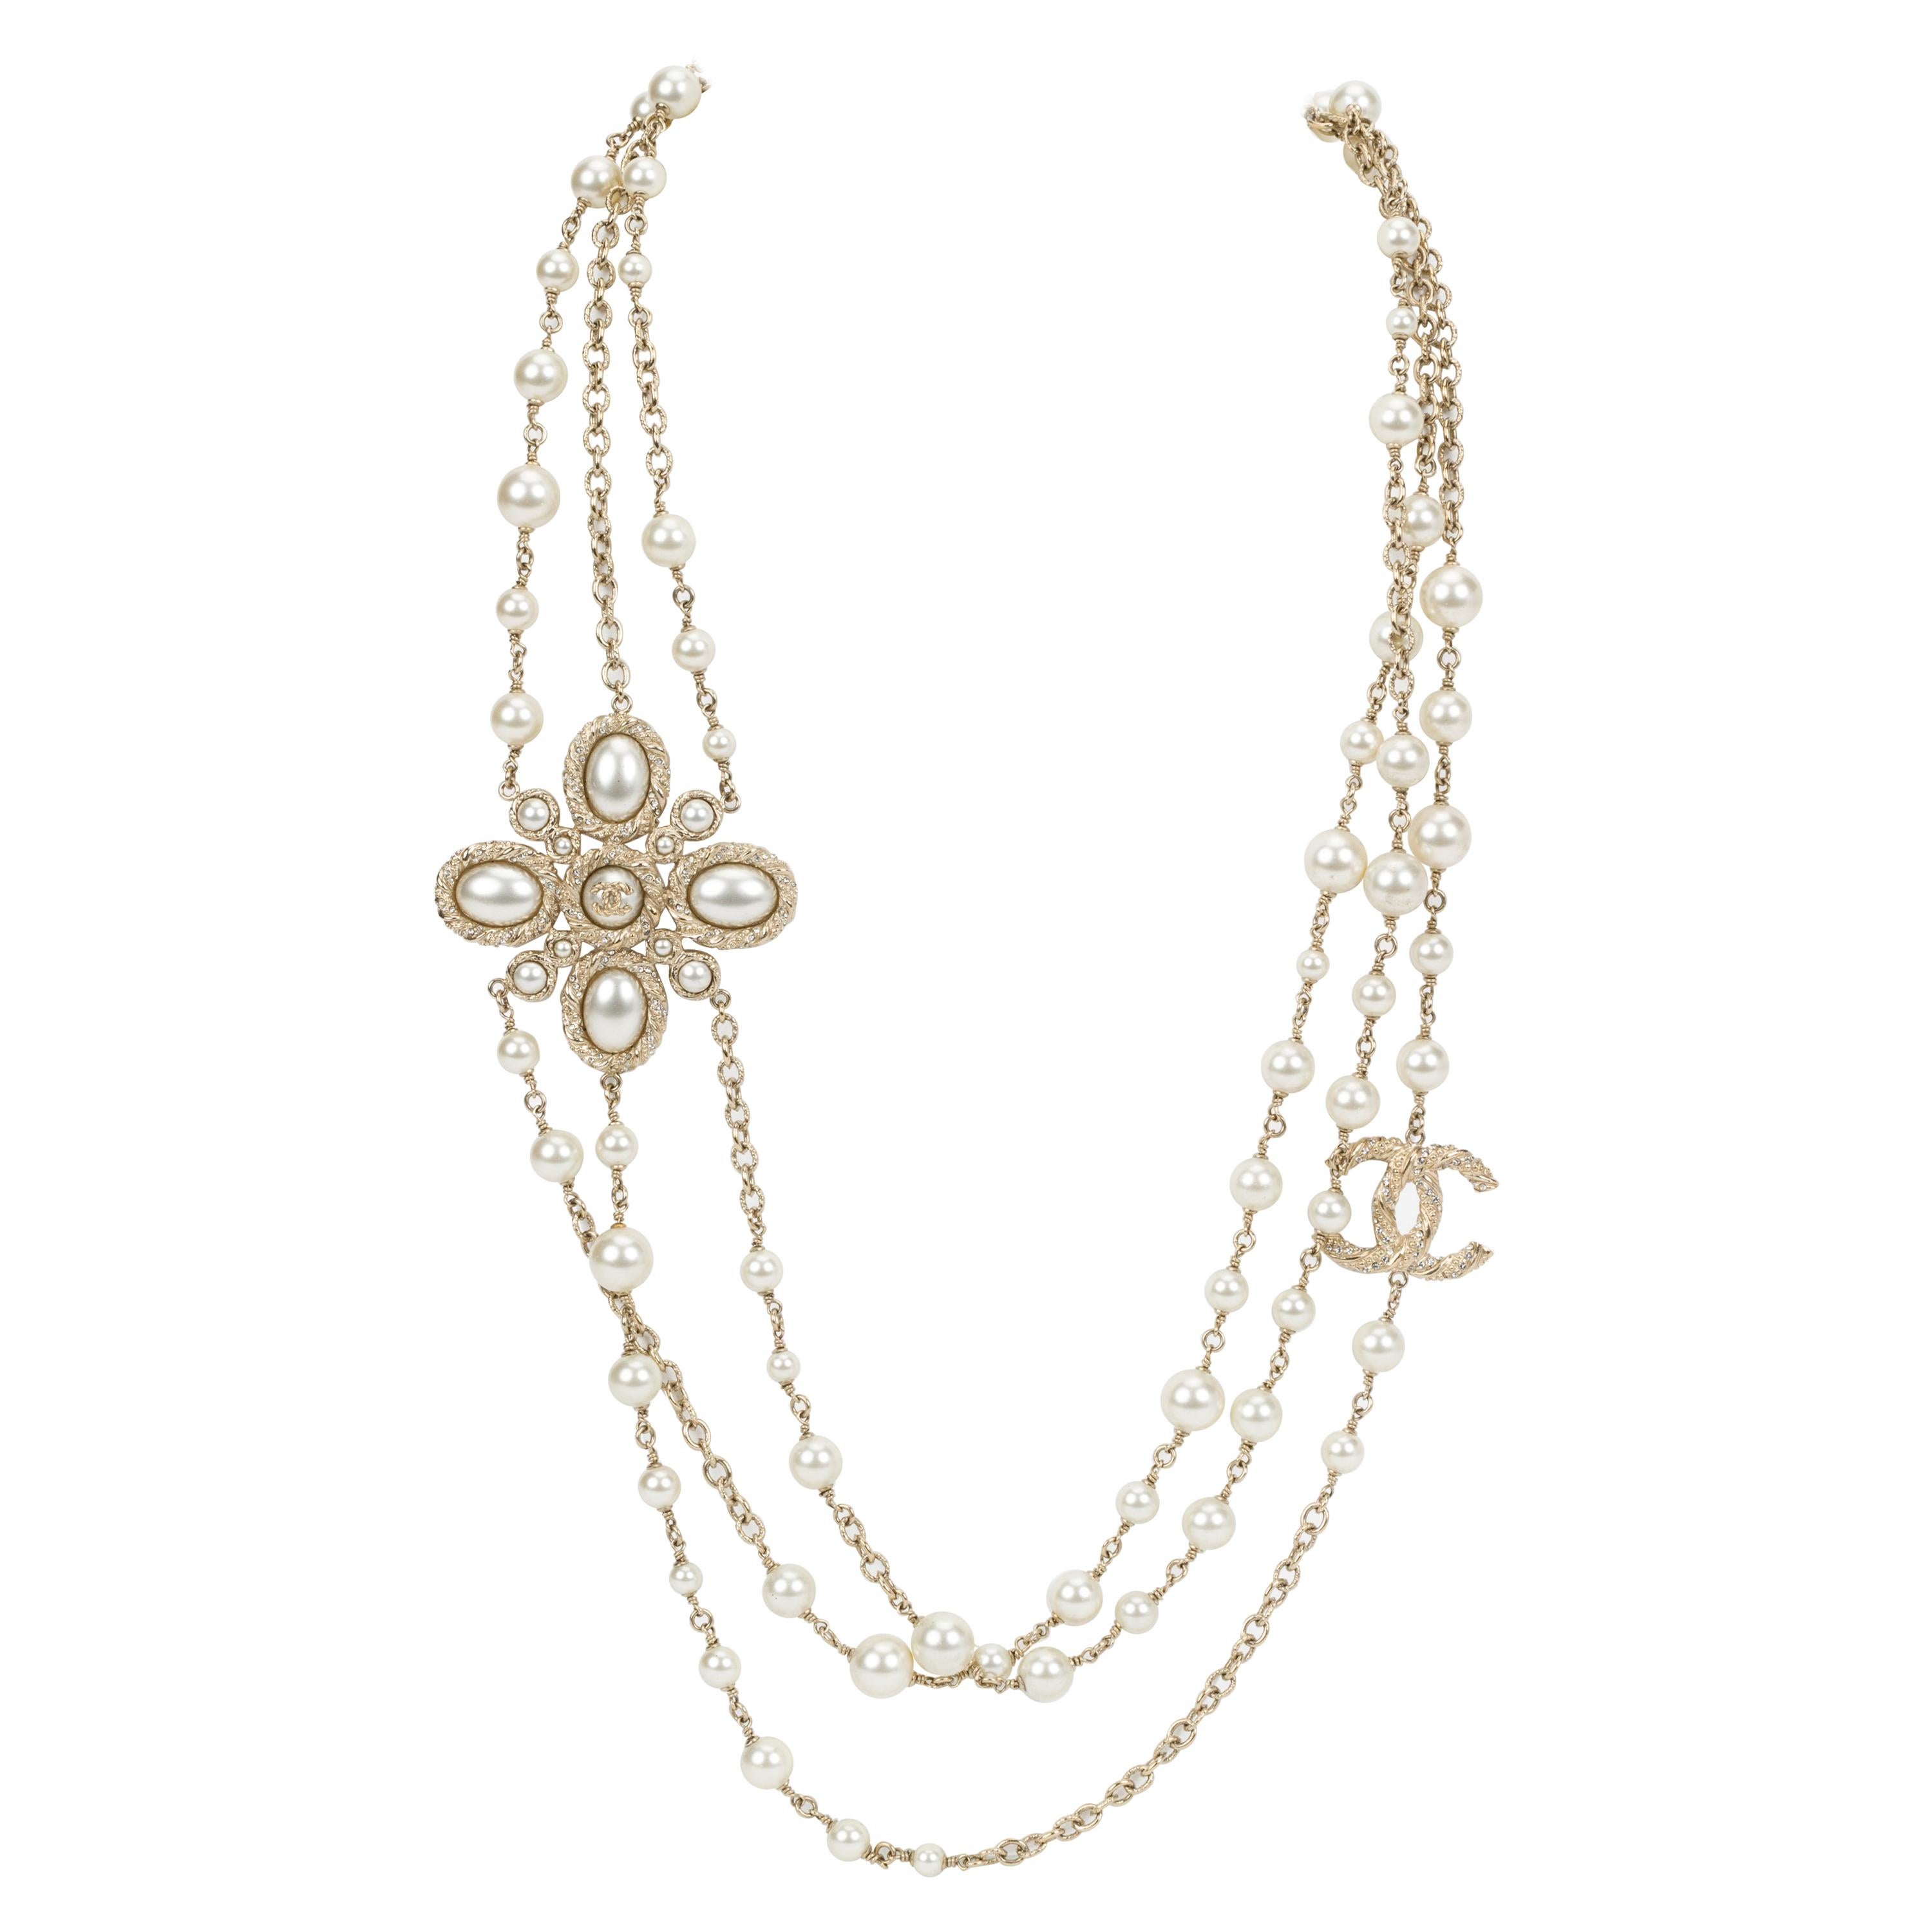 Chanel Triple Strand Pearl Necklace